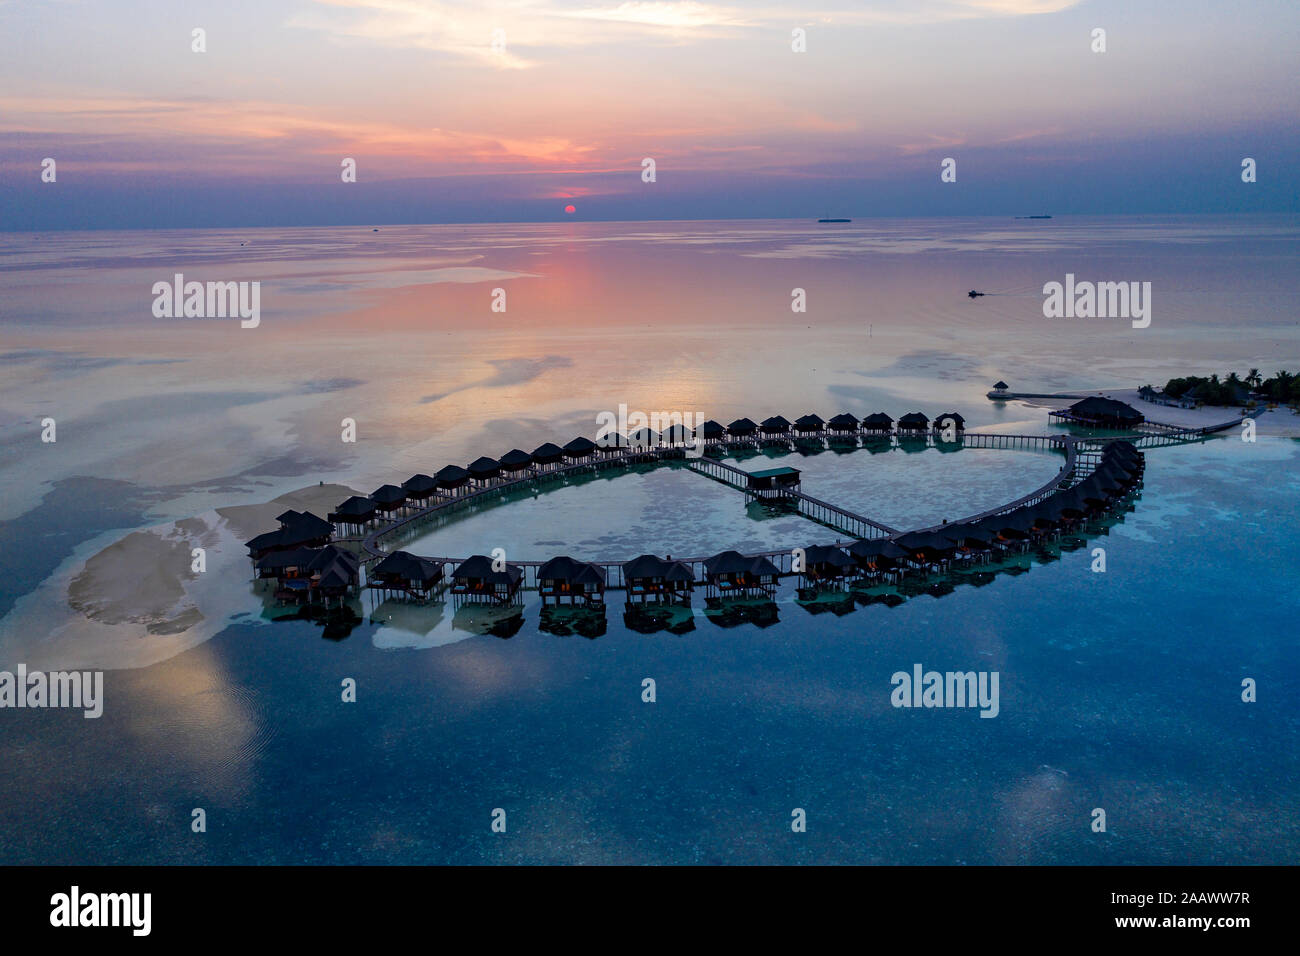 Aerial view of stilt houses at Olhuveli island during sunrise at Maldives Stock Photo